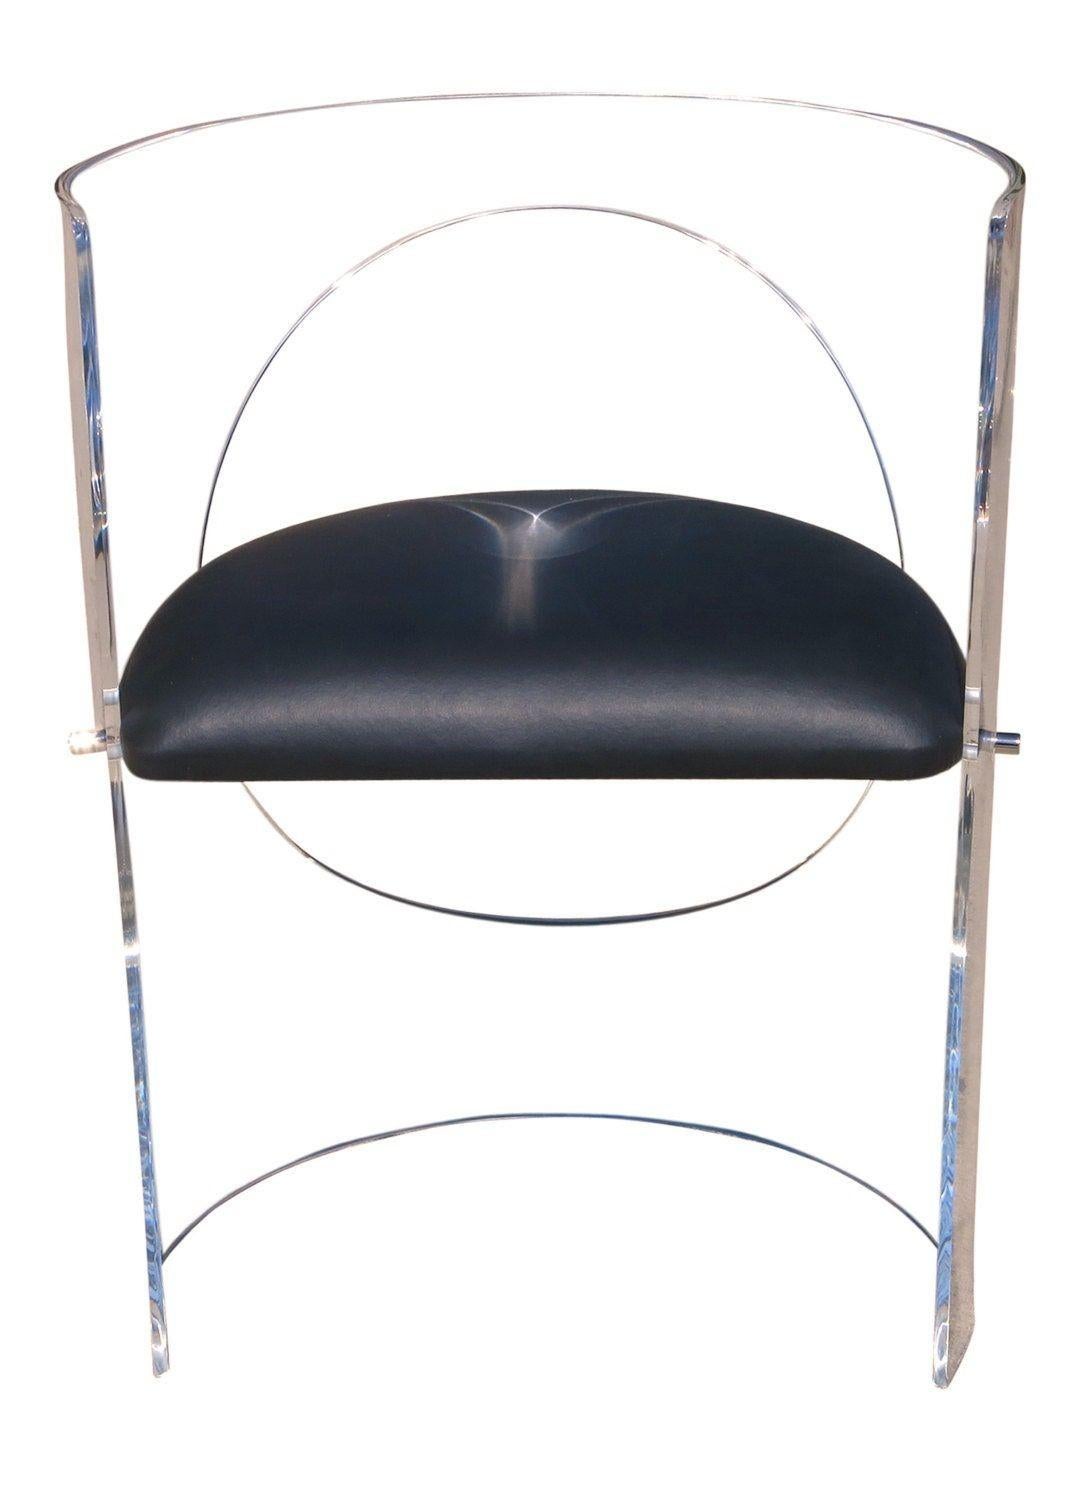 These mid-century modern design armchairs by the famed designer Charles Hollis Jones feature wrap around Lucite frames that envelop you while sitting on a floating black vinyl seat.

These chairs are being remade by the designer